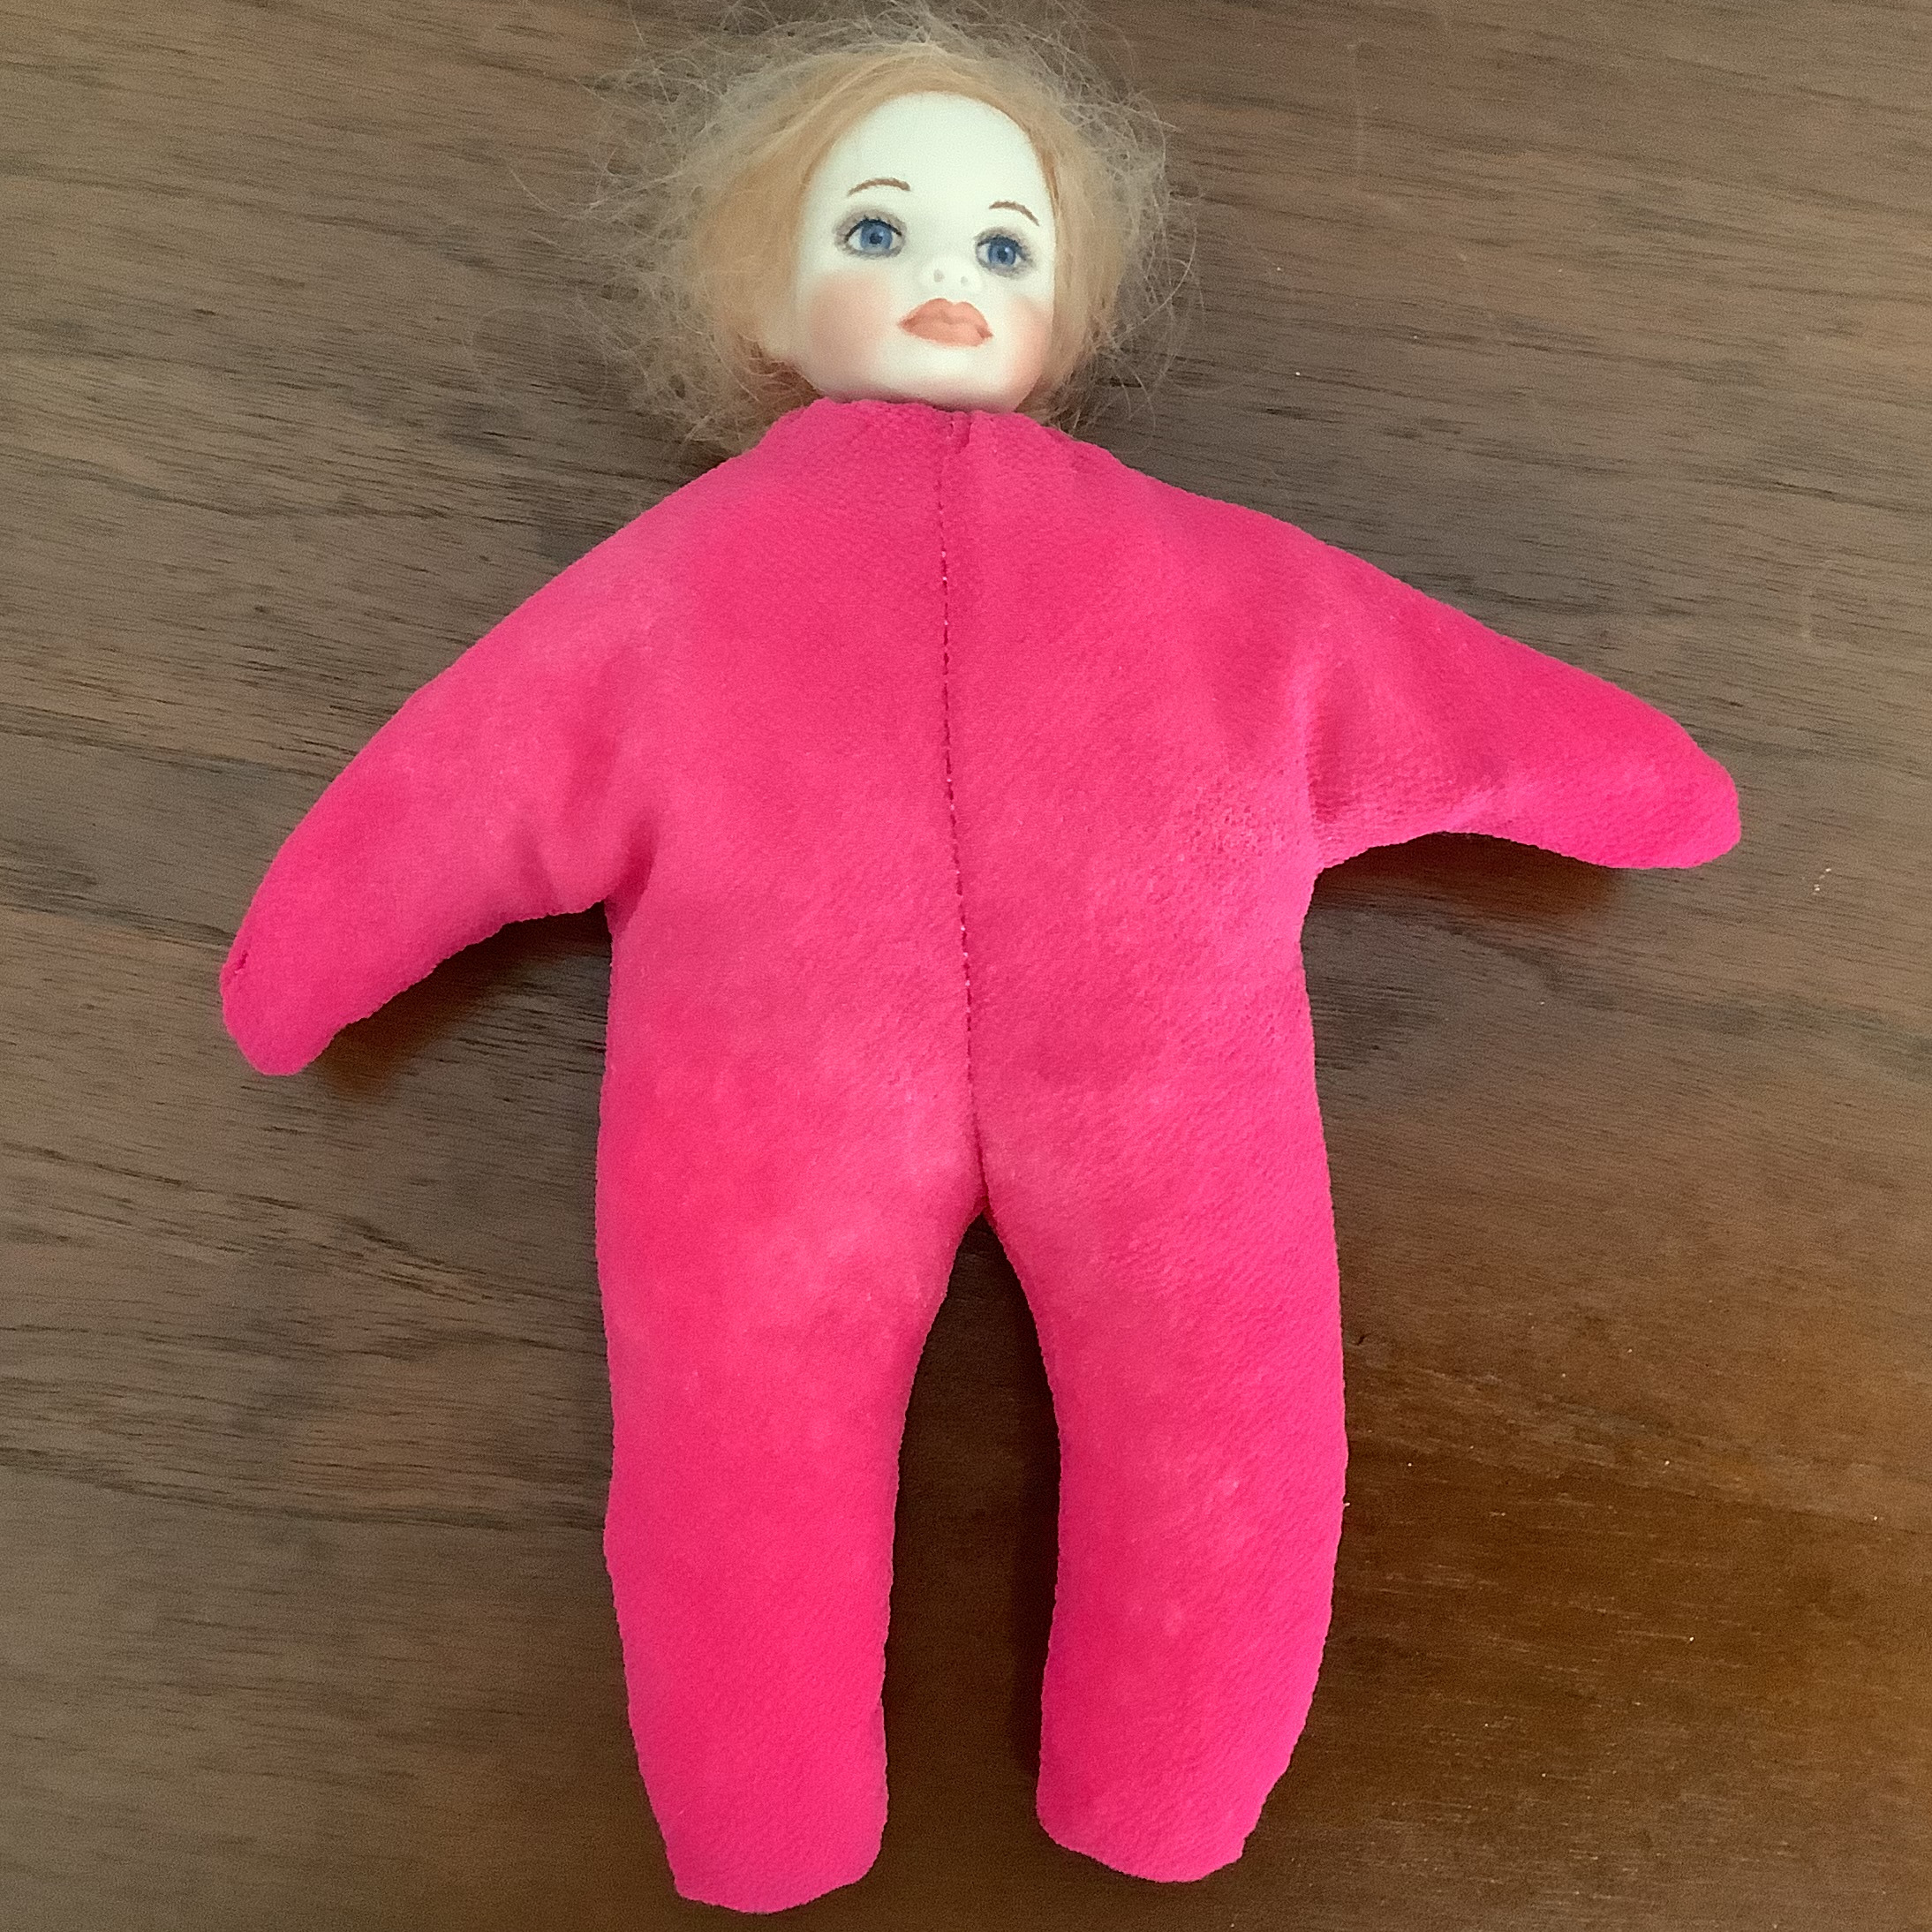 Heavily made-up baby doll with very light skin with a shocking pink starfish body